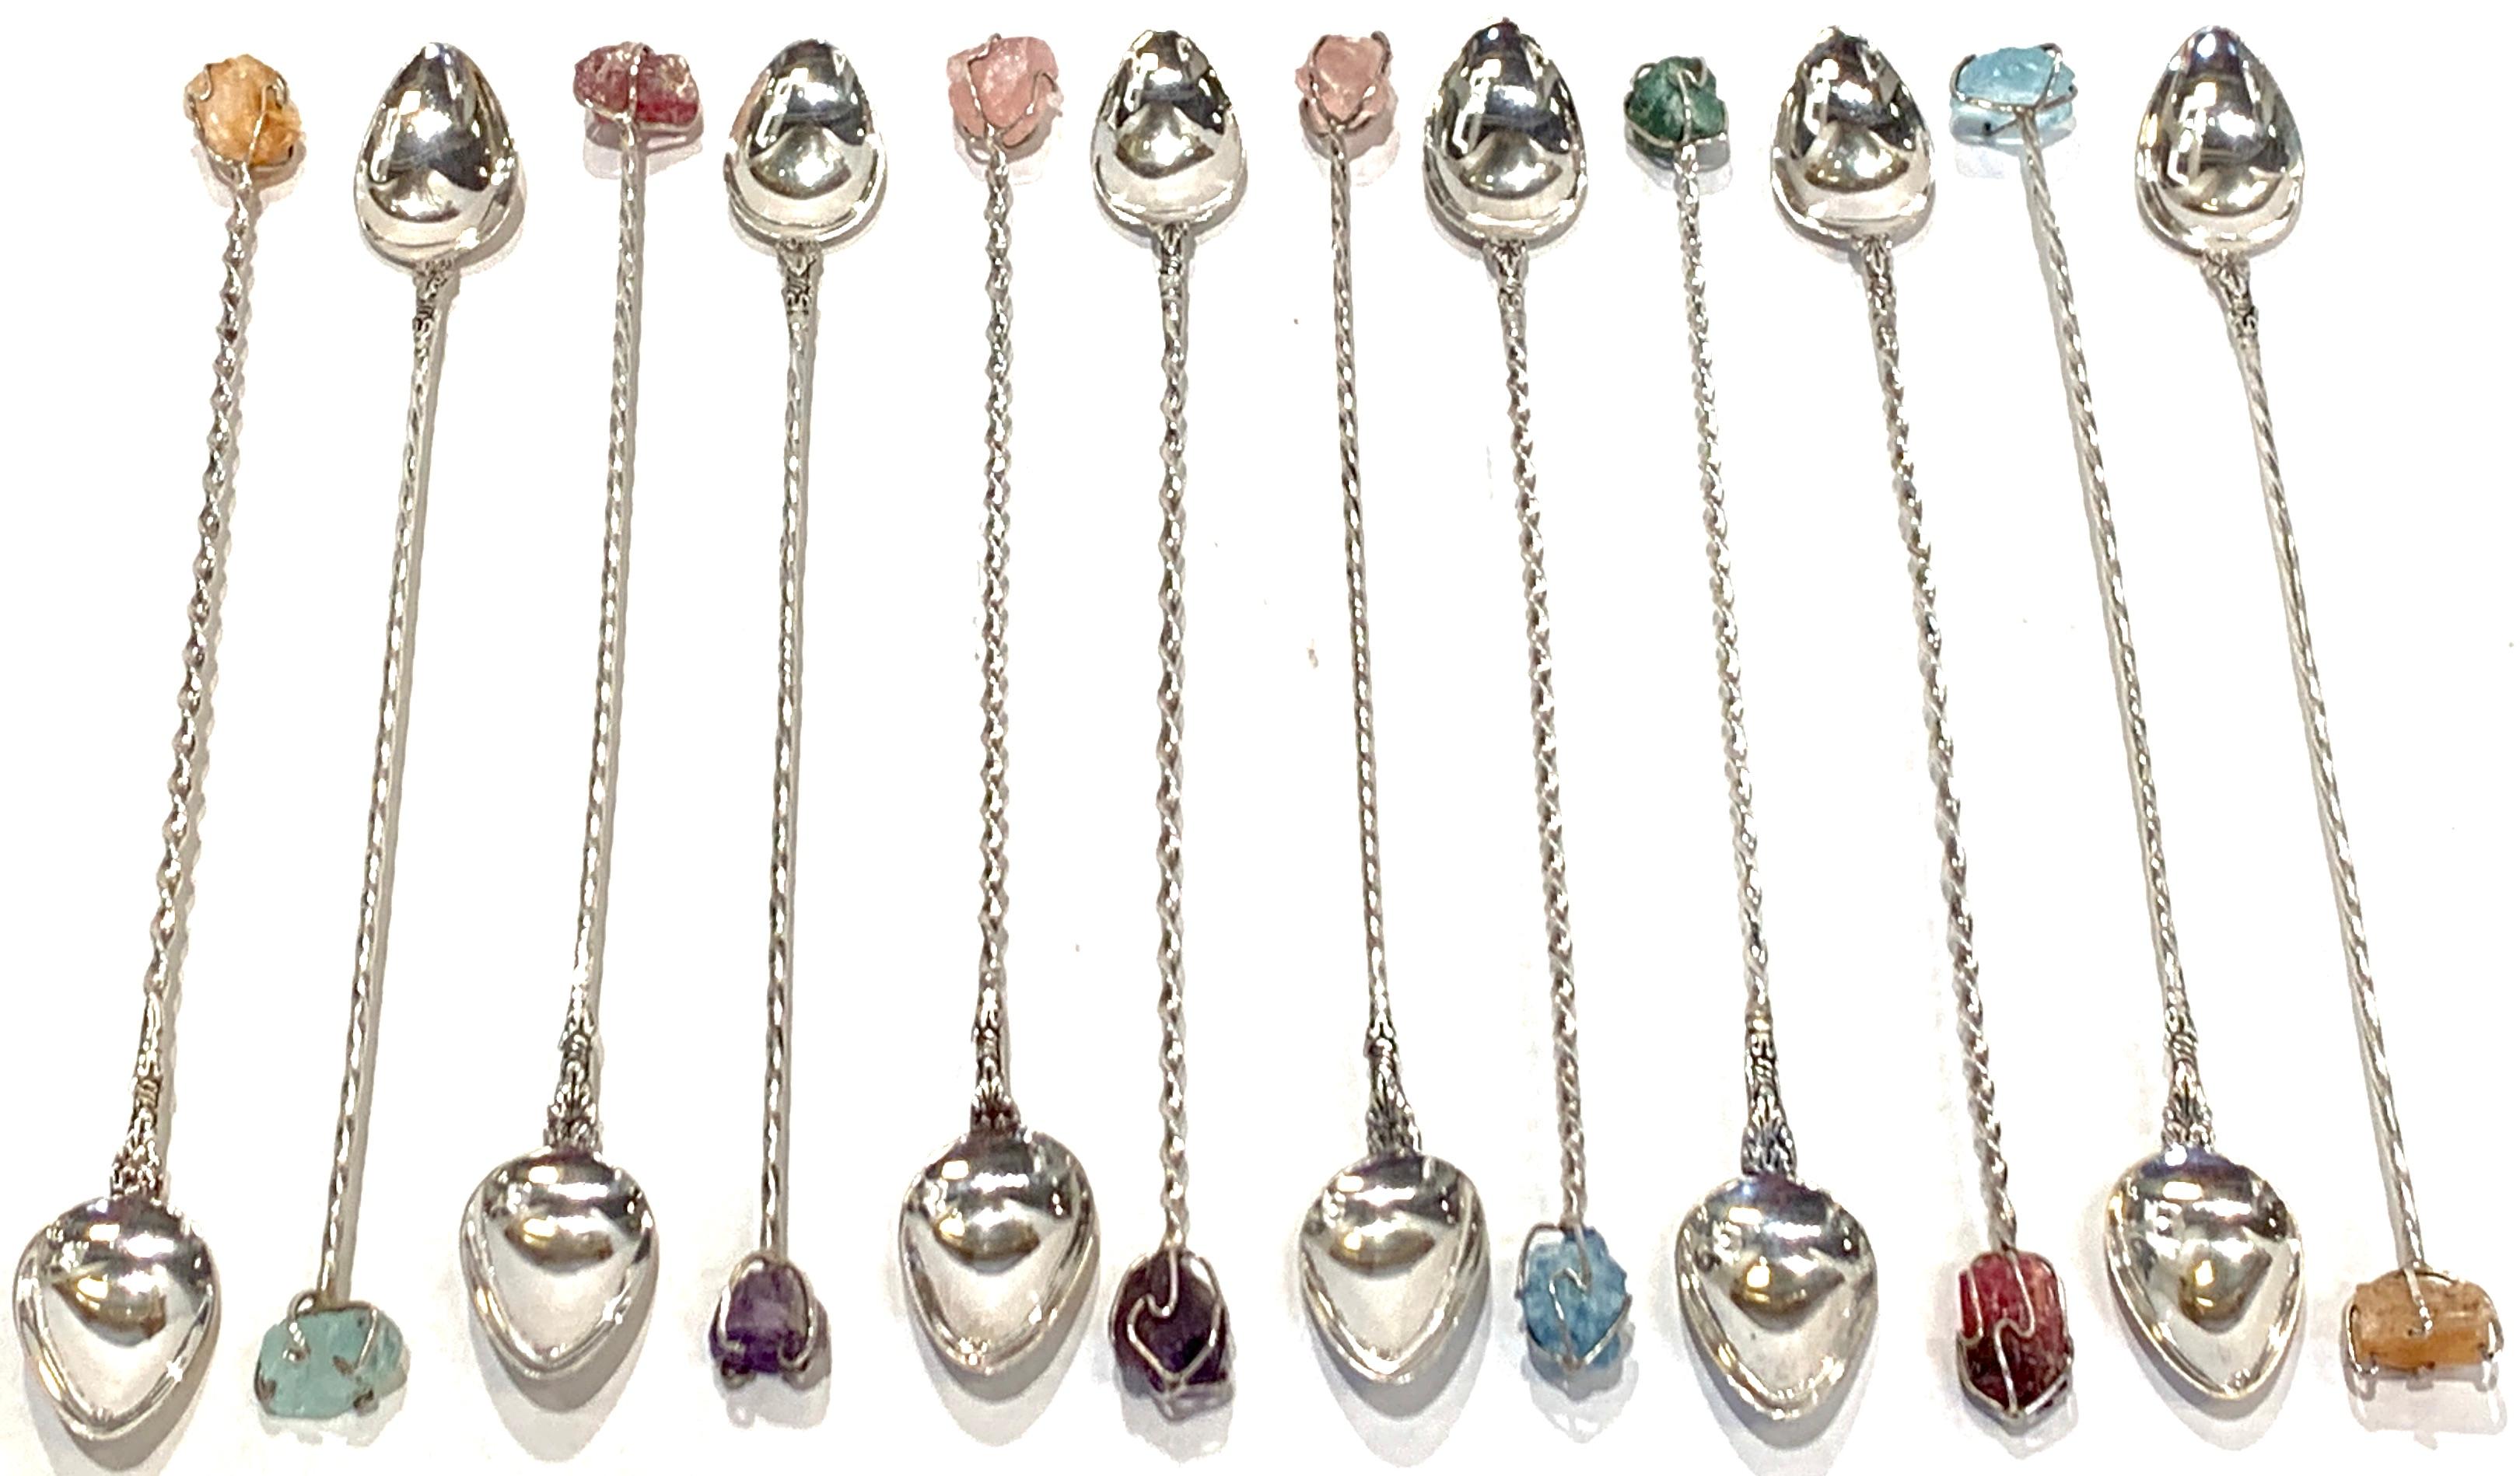 12 modern sterling (.800 Silver) & multicolored quartz ice tea spoons. Each one fitted with a 1/2